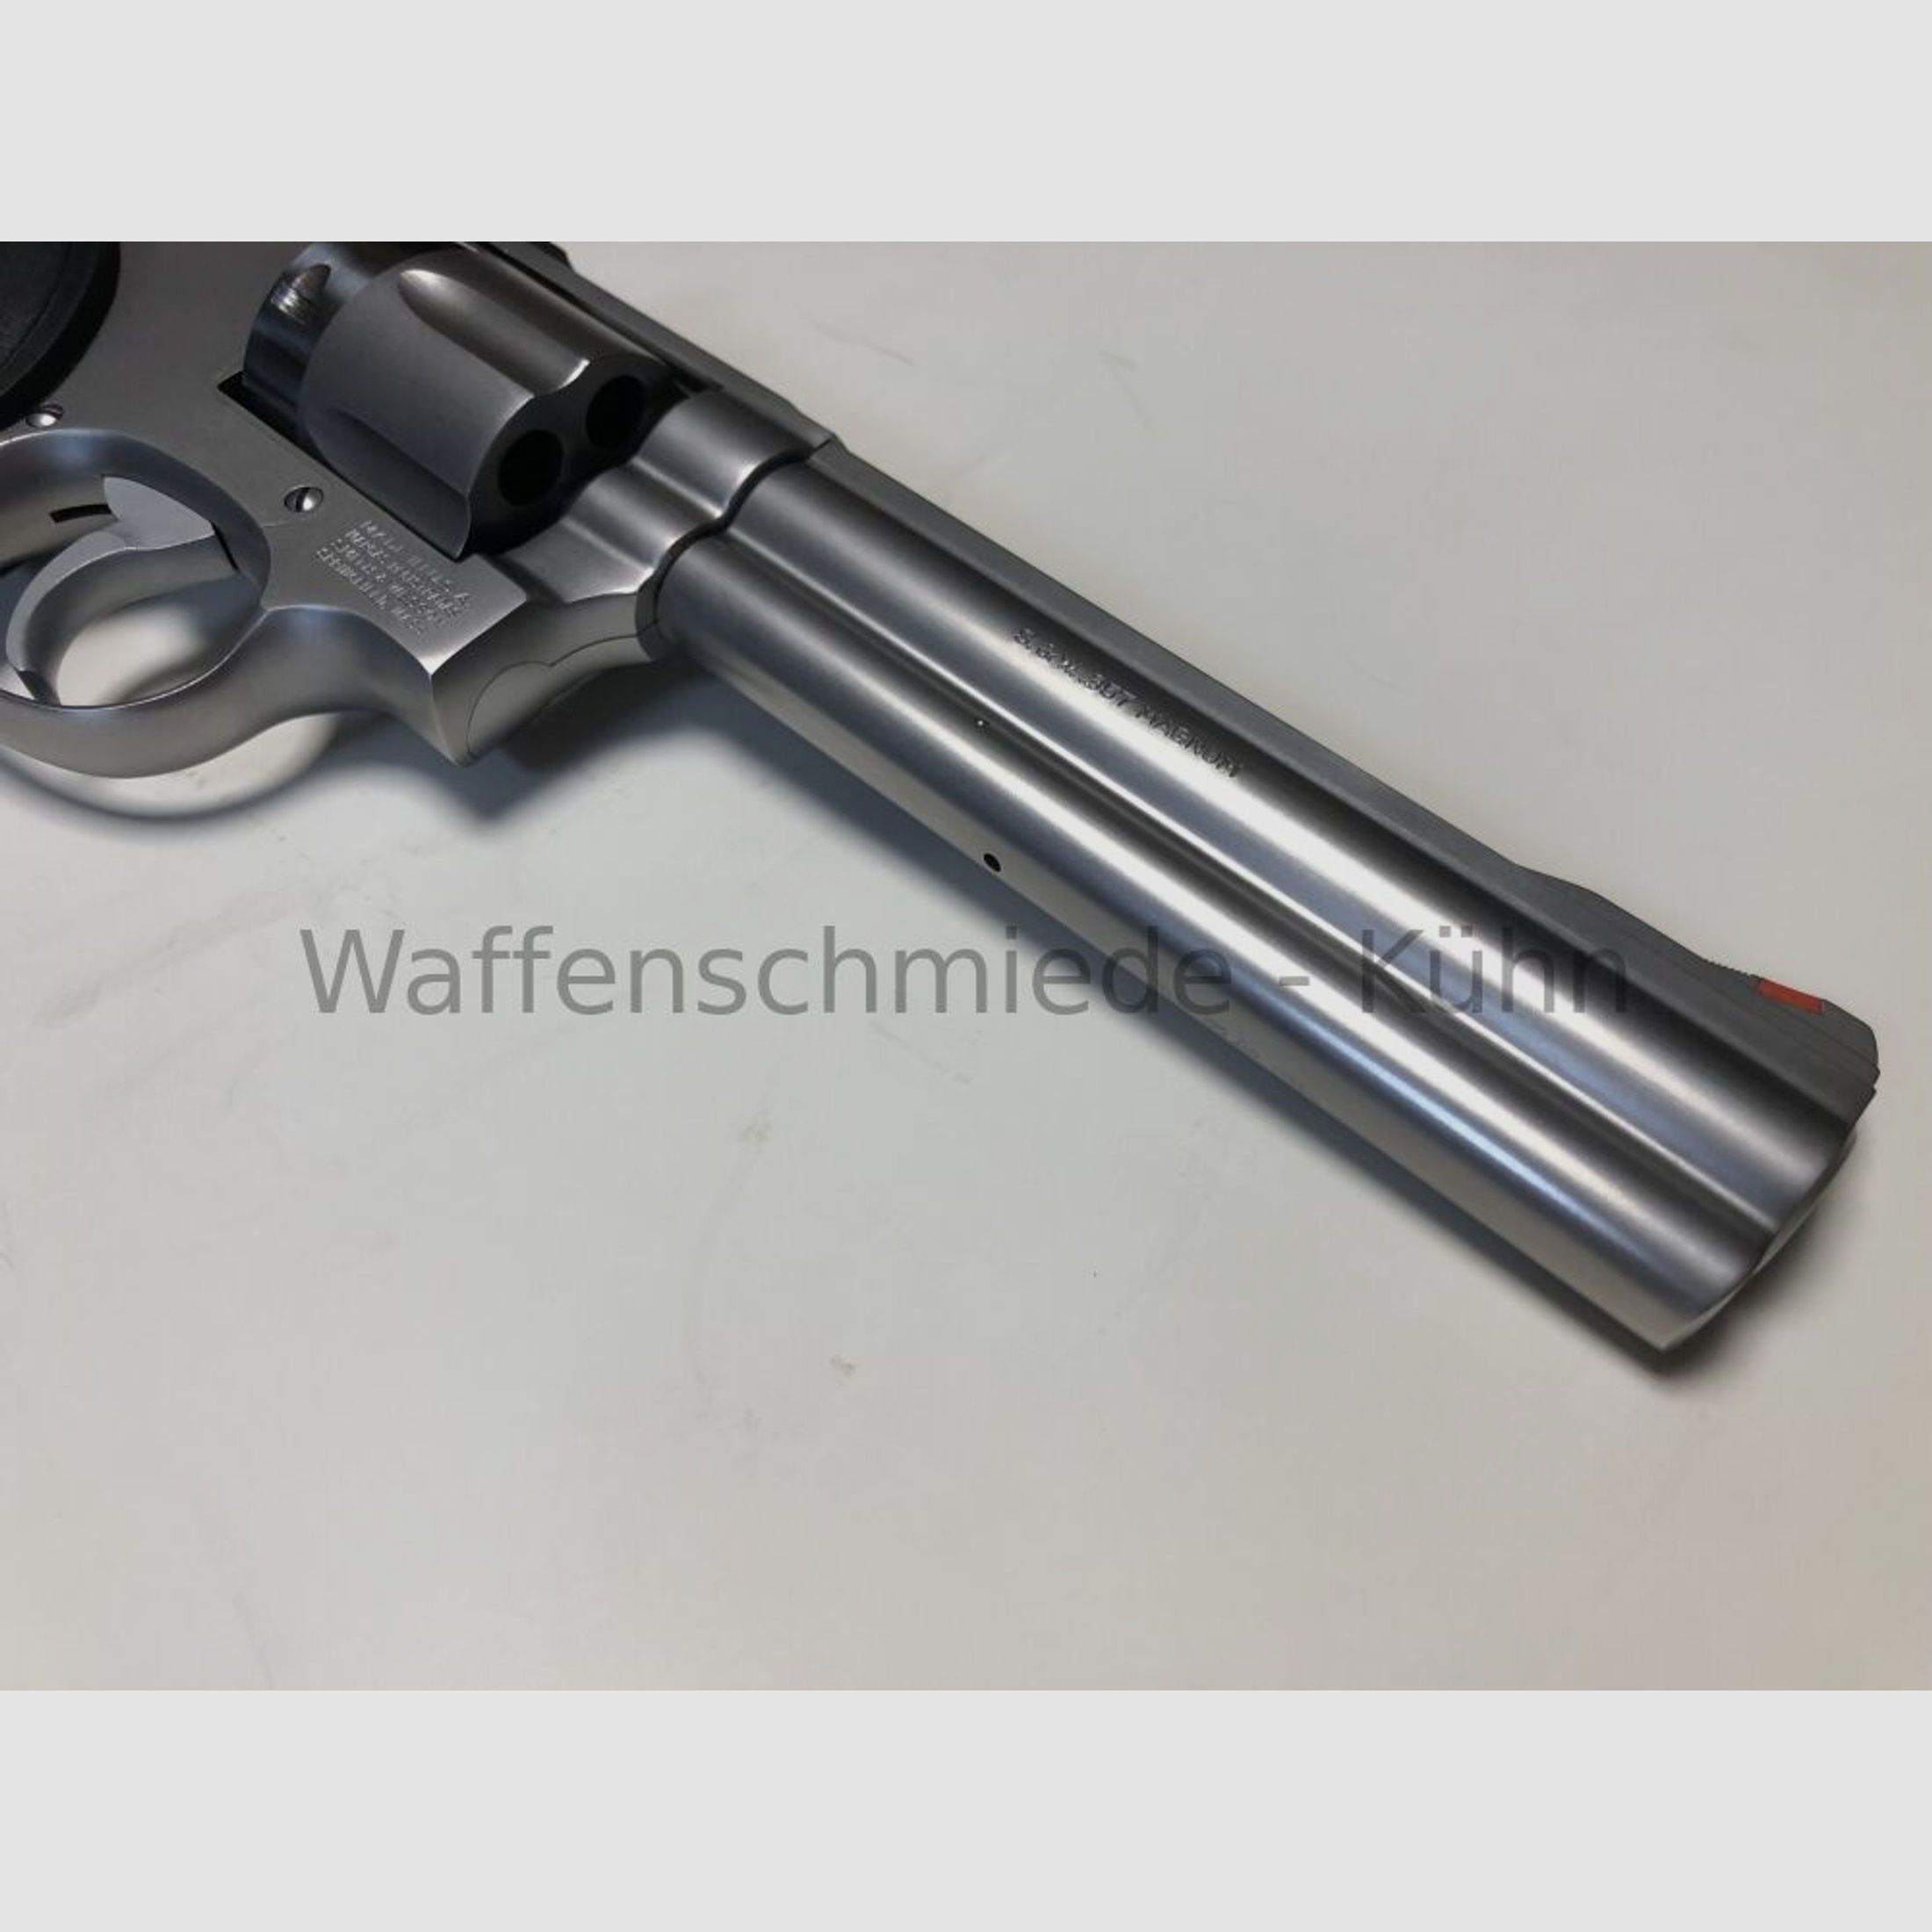 Smith & Wesson	 Model 686